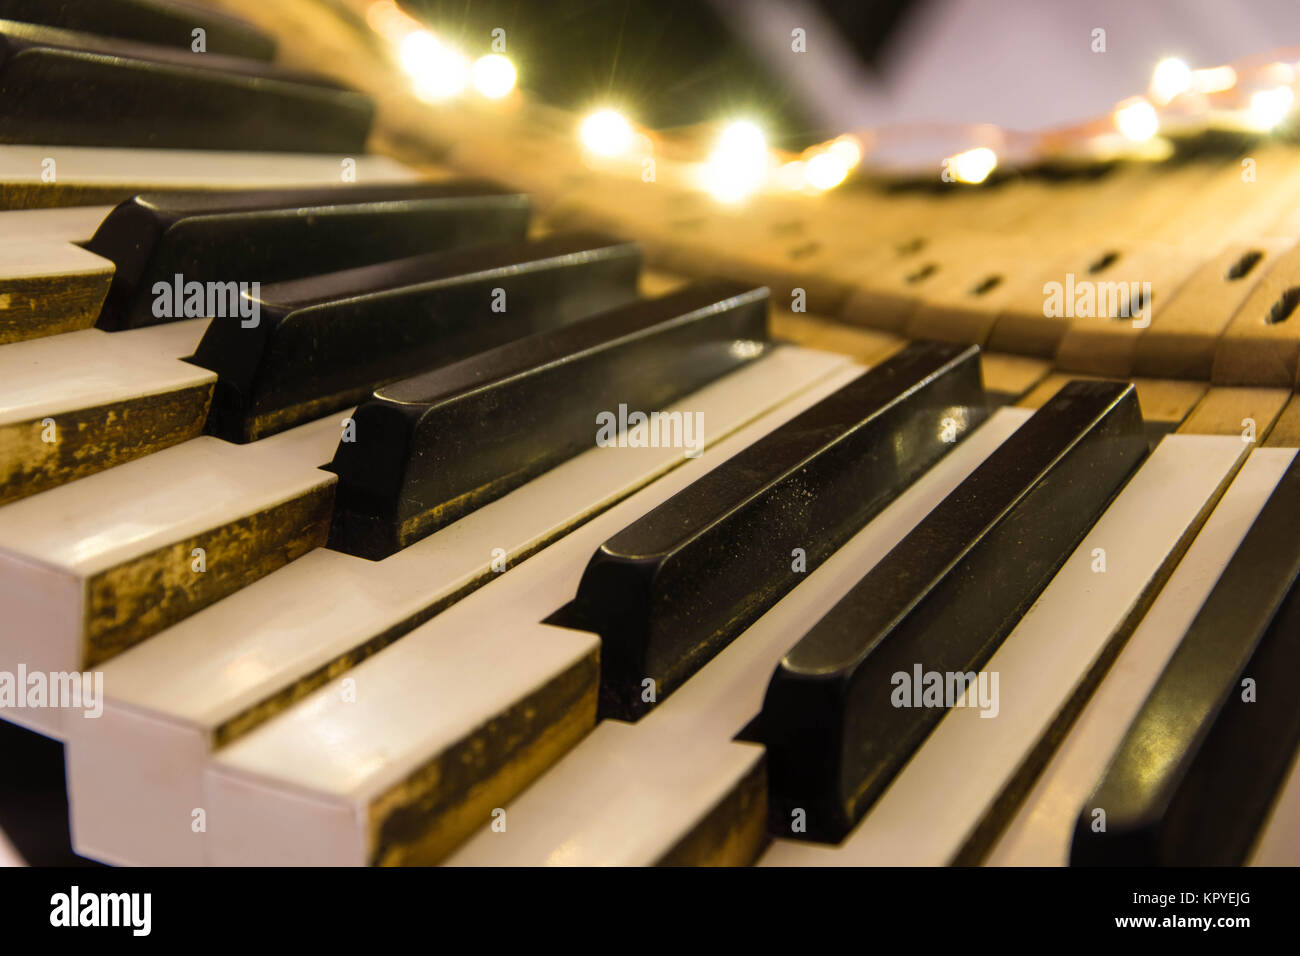 Old piano keyboard twisted with keys pushed down. Keys removed from the body of musical instrument lit up as a Christmas decoration Stock Photo